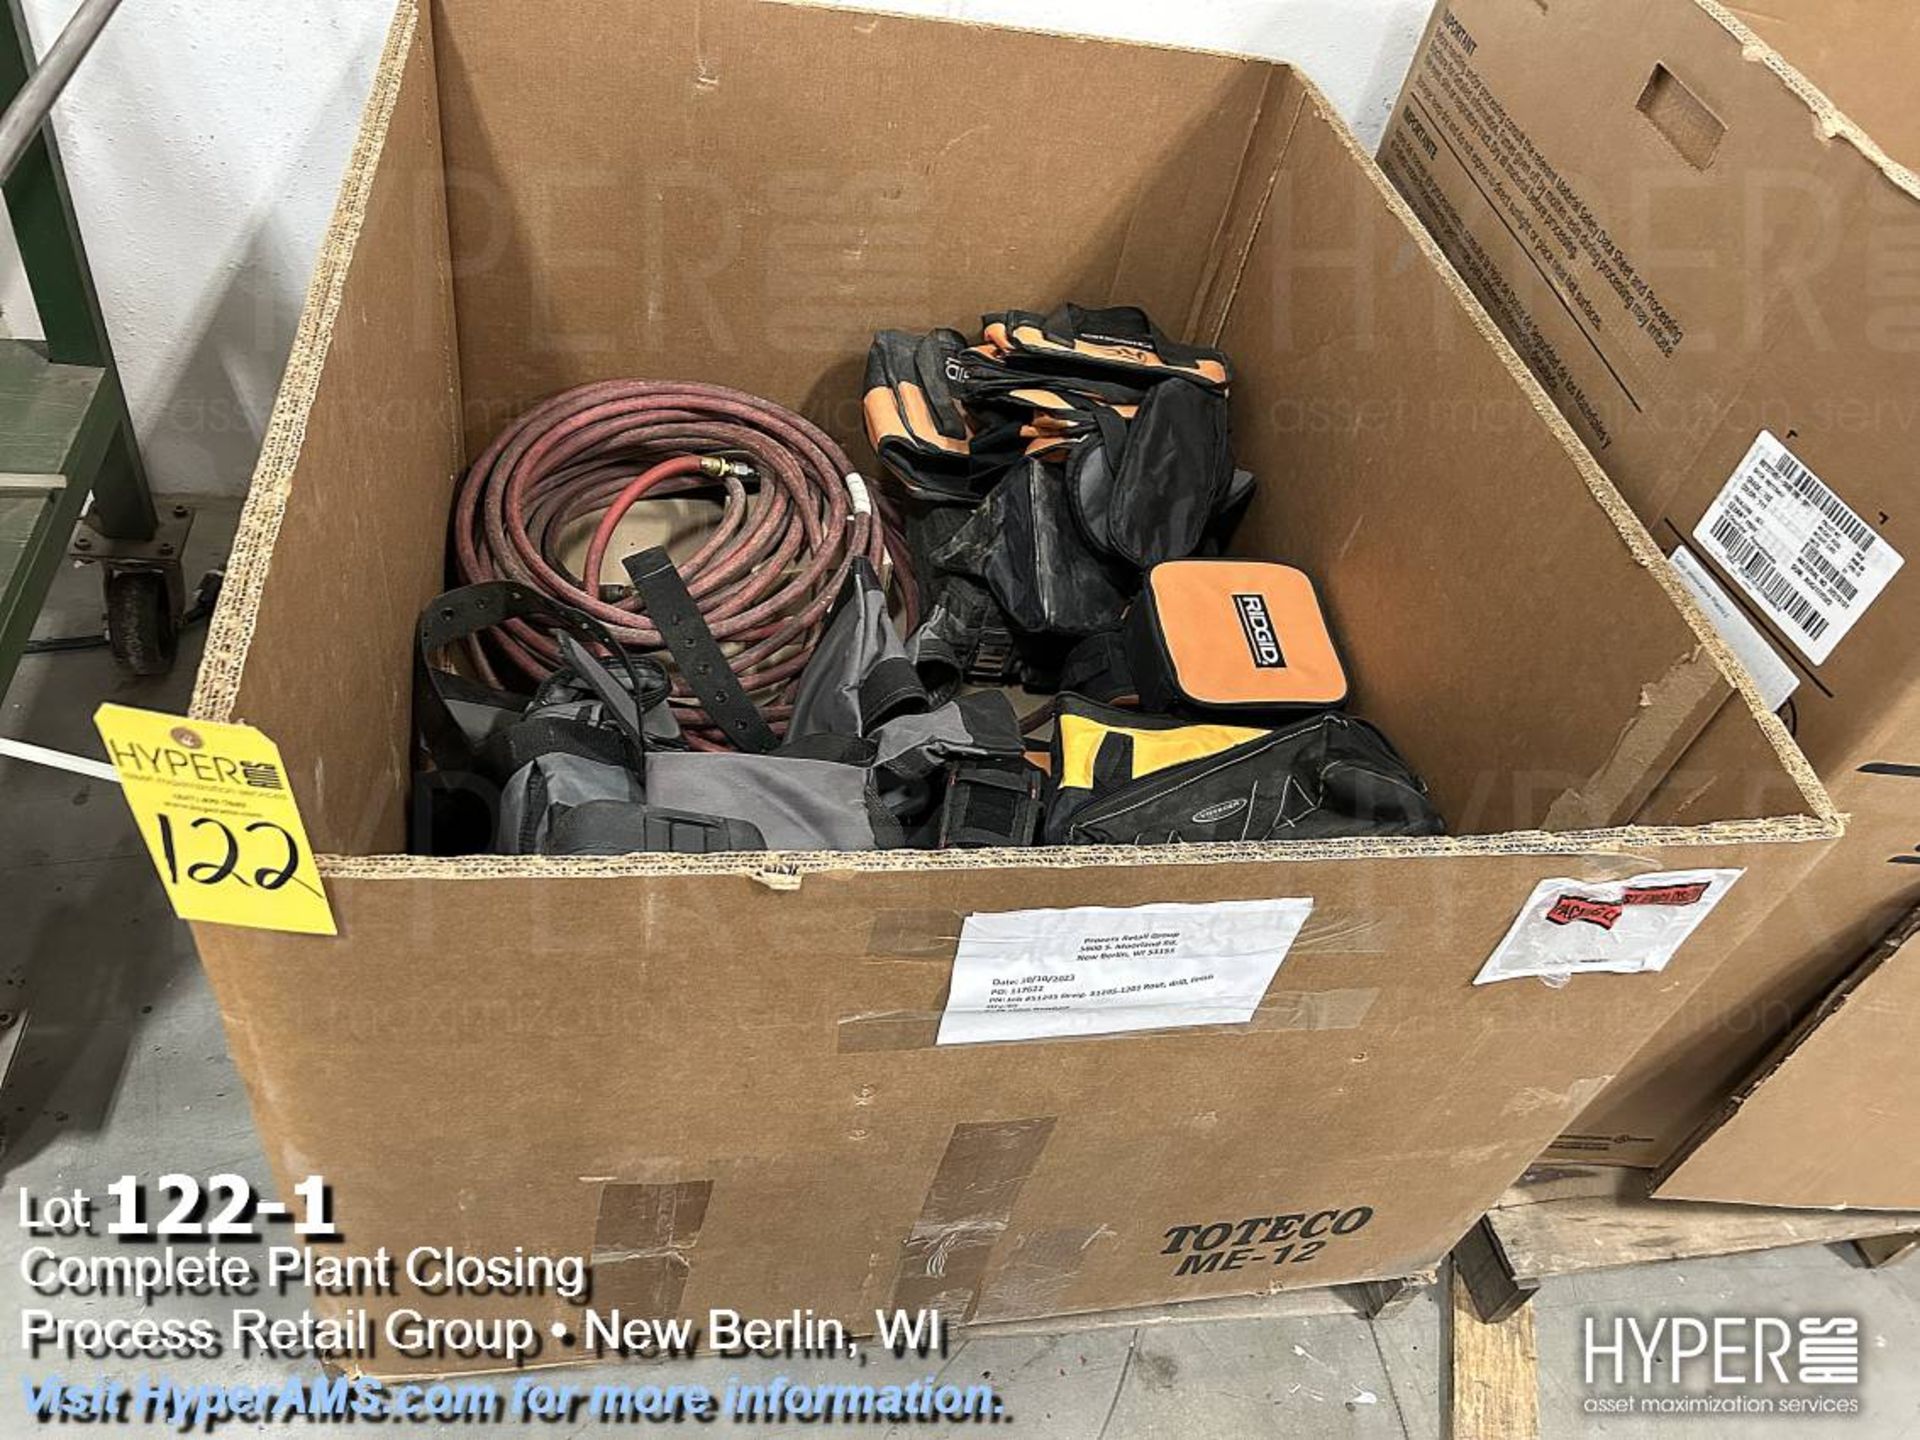 Air hose, tool belts, and tool bags